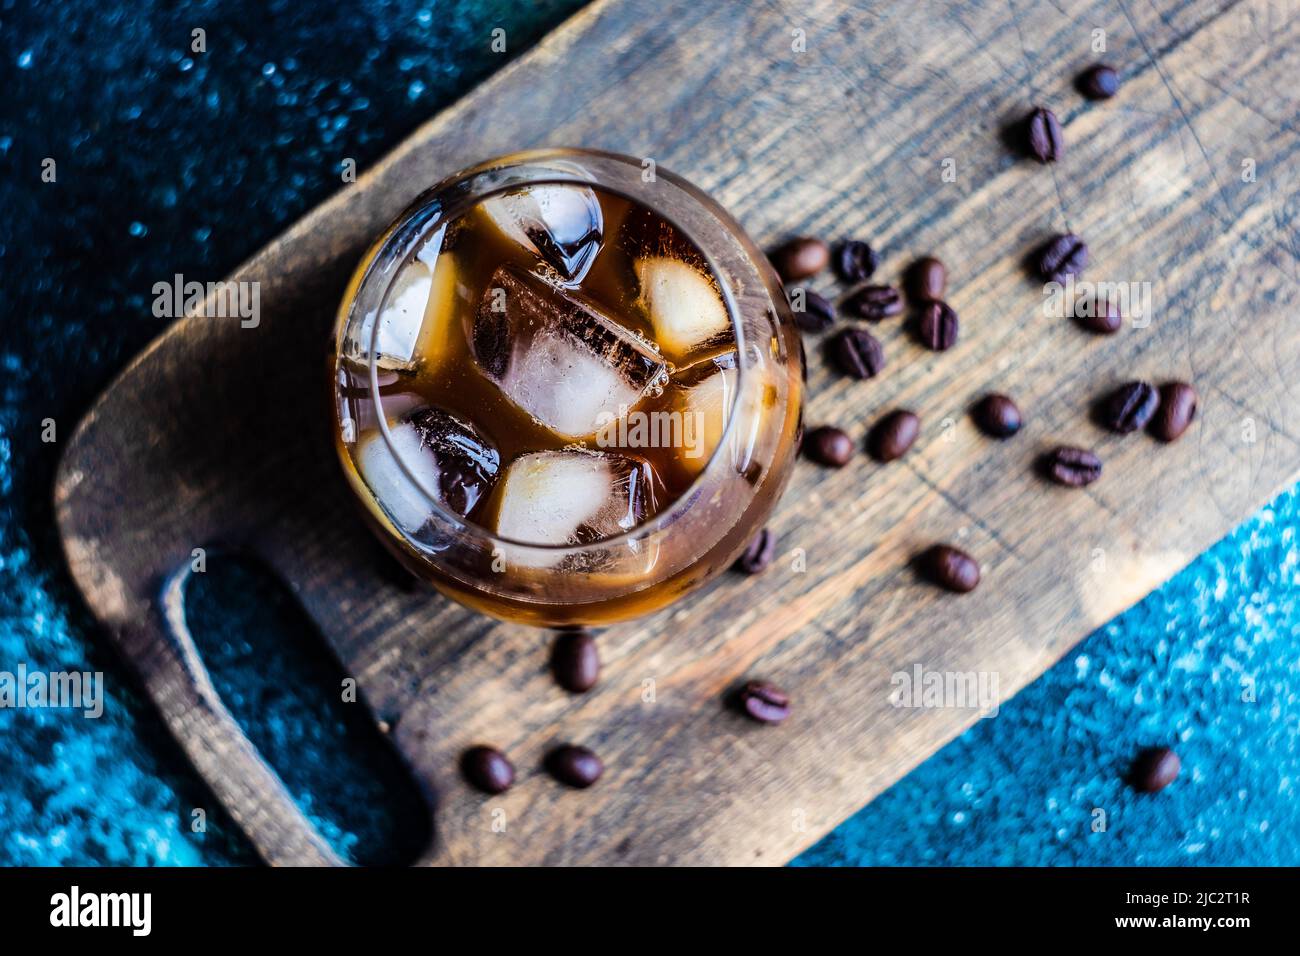 Close-up of an iced coffee drink on a chopping board with roasted coffee beans Stock Photo